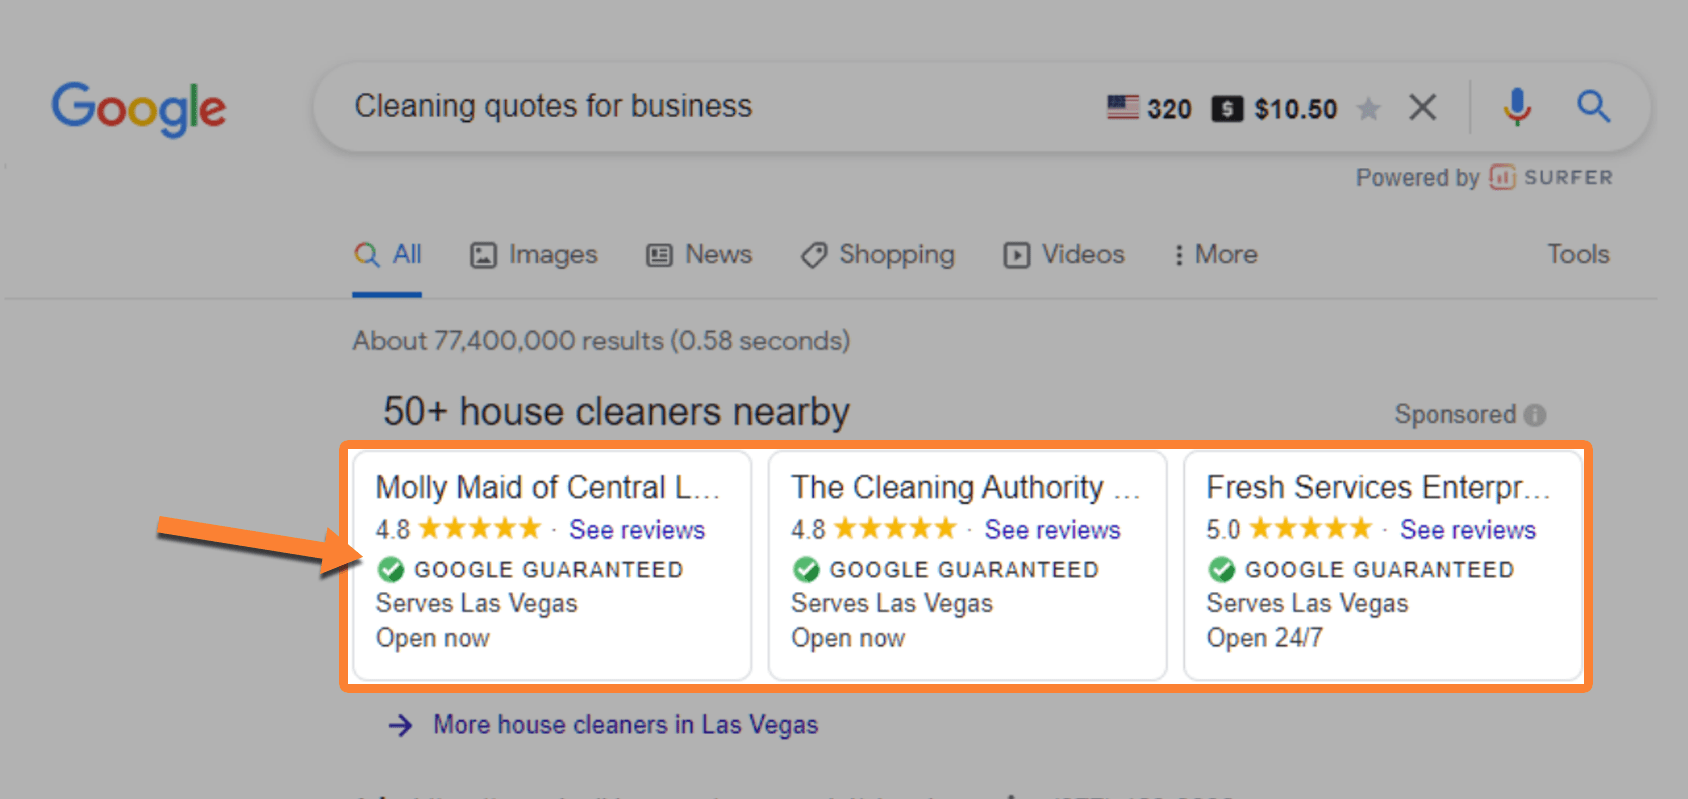 Google local ads for cleaning business